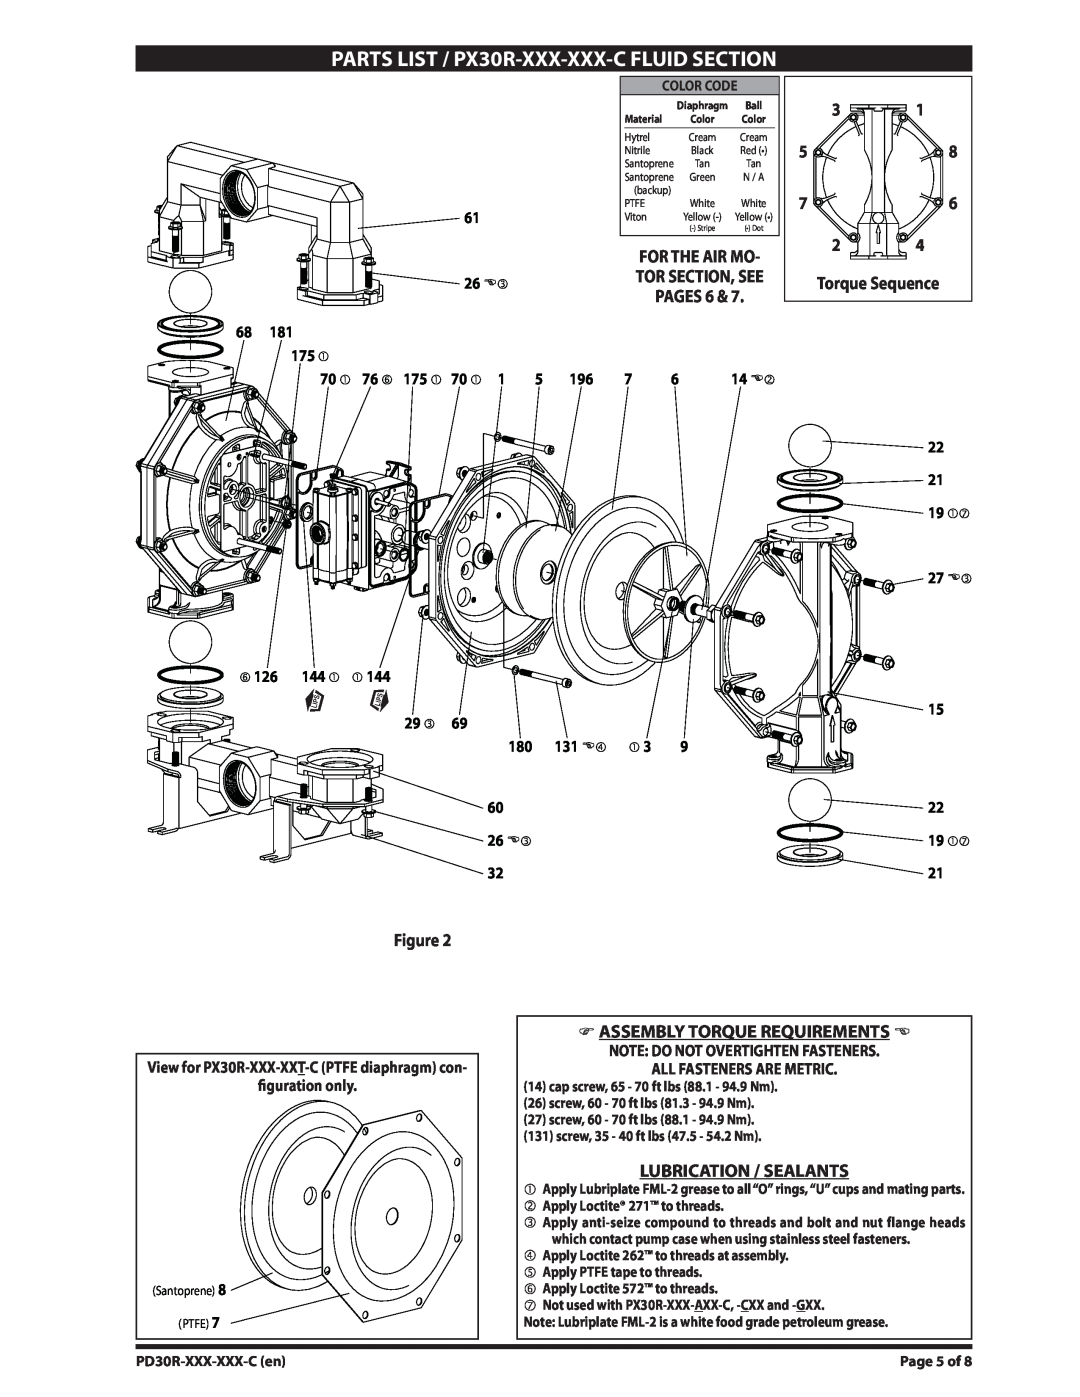 Ingersoll-Rand PD30R-XXX-XXX-C dimensions 31 58 76 24 Torque Sequence, Assembly Torque Requirements, Lubrication / Sealants 